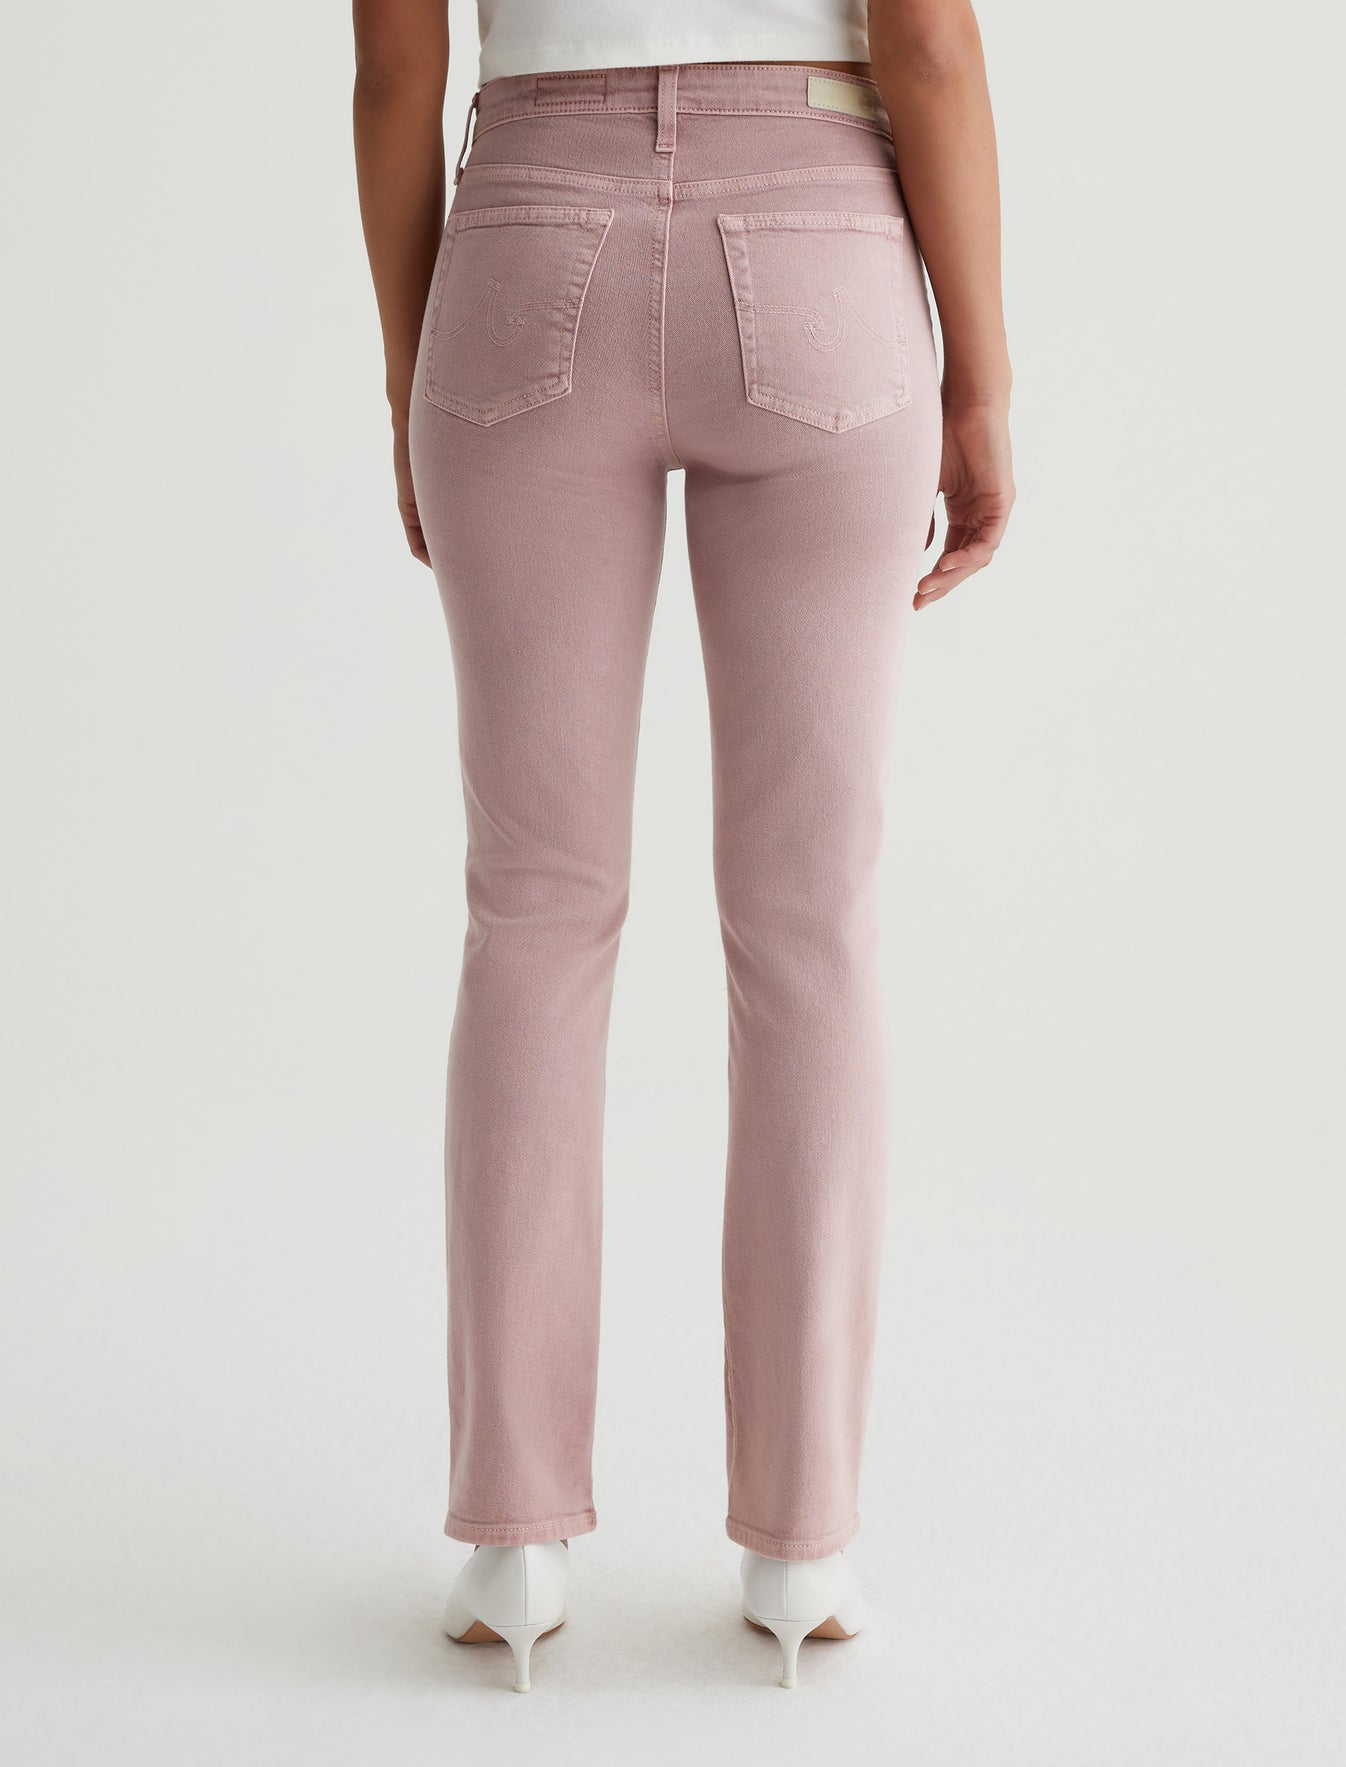 Women's Straight Leg Slim Ankle Pants - A New Day™ Light Pink 2